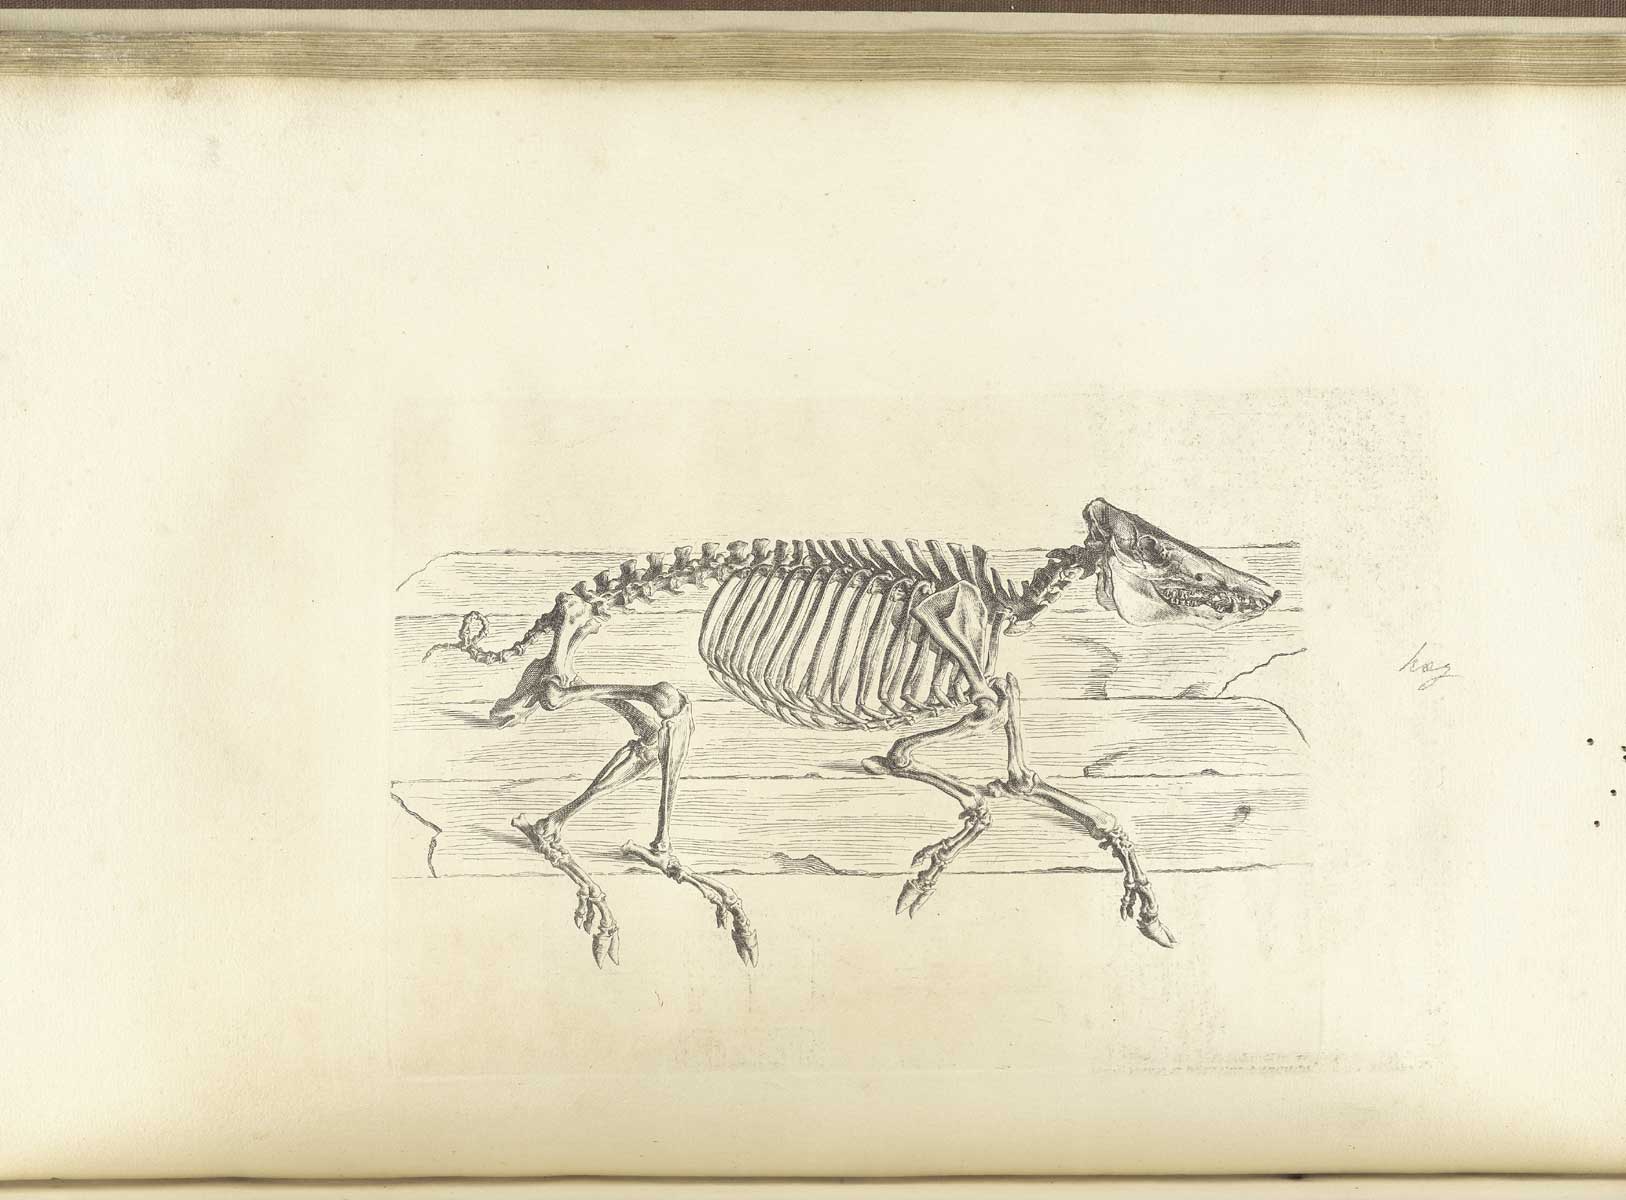 Engraving of the skeleton of a hog seemingly lying down on wooden planks facing the right with a curly tail, from William Cheselden’s Osteographia, NLM Call no.: WZ 260 C499o 1733.